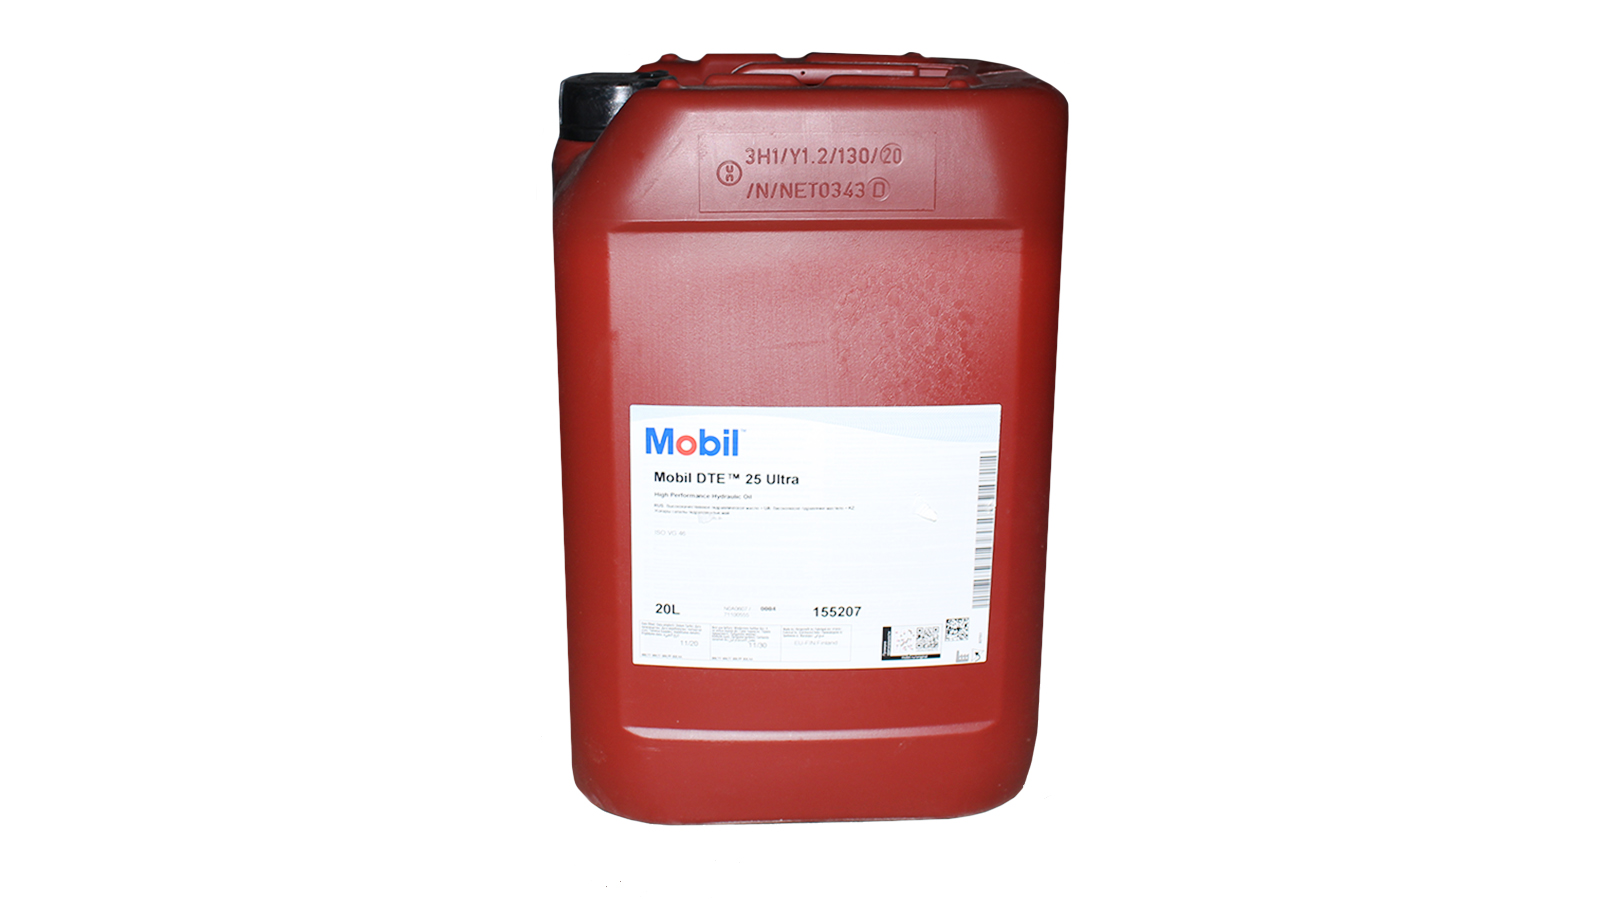 Mobil dte 25. Масло гидравлическое mobil DTE 24 Ultra 20 л 155215. Масло гидравлическое mobil DTE Oil 25 ISO 46,. Гидравлическое масло mobil DTE 25, 20 Л. Масло гидравлическое mobil DTE 10 excel 100 20 л.